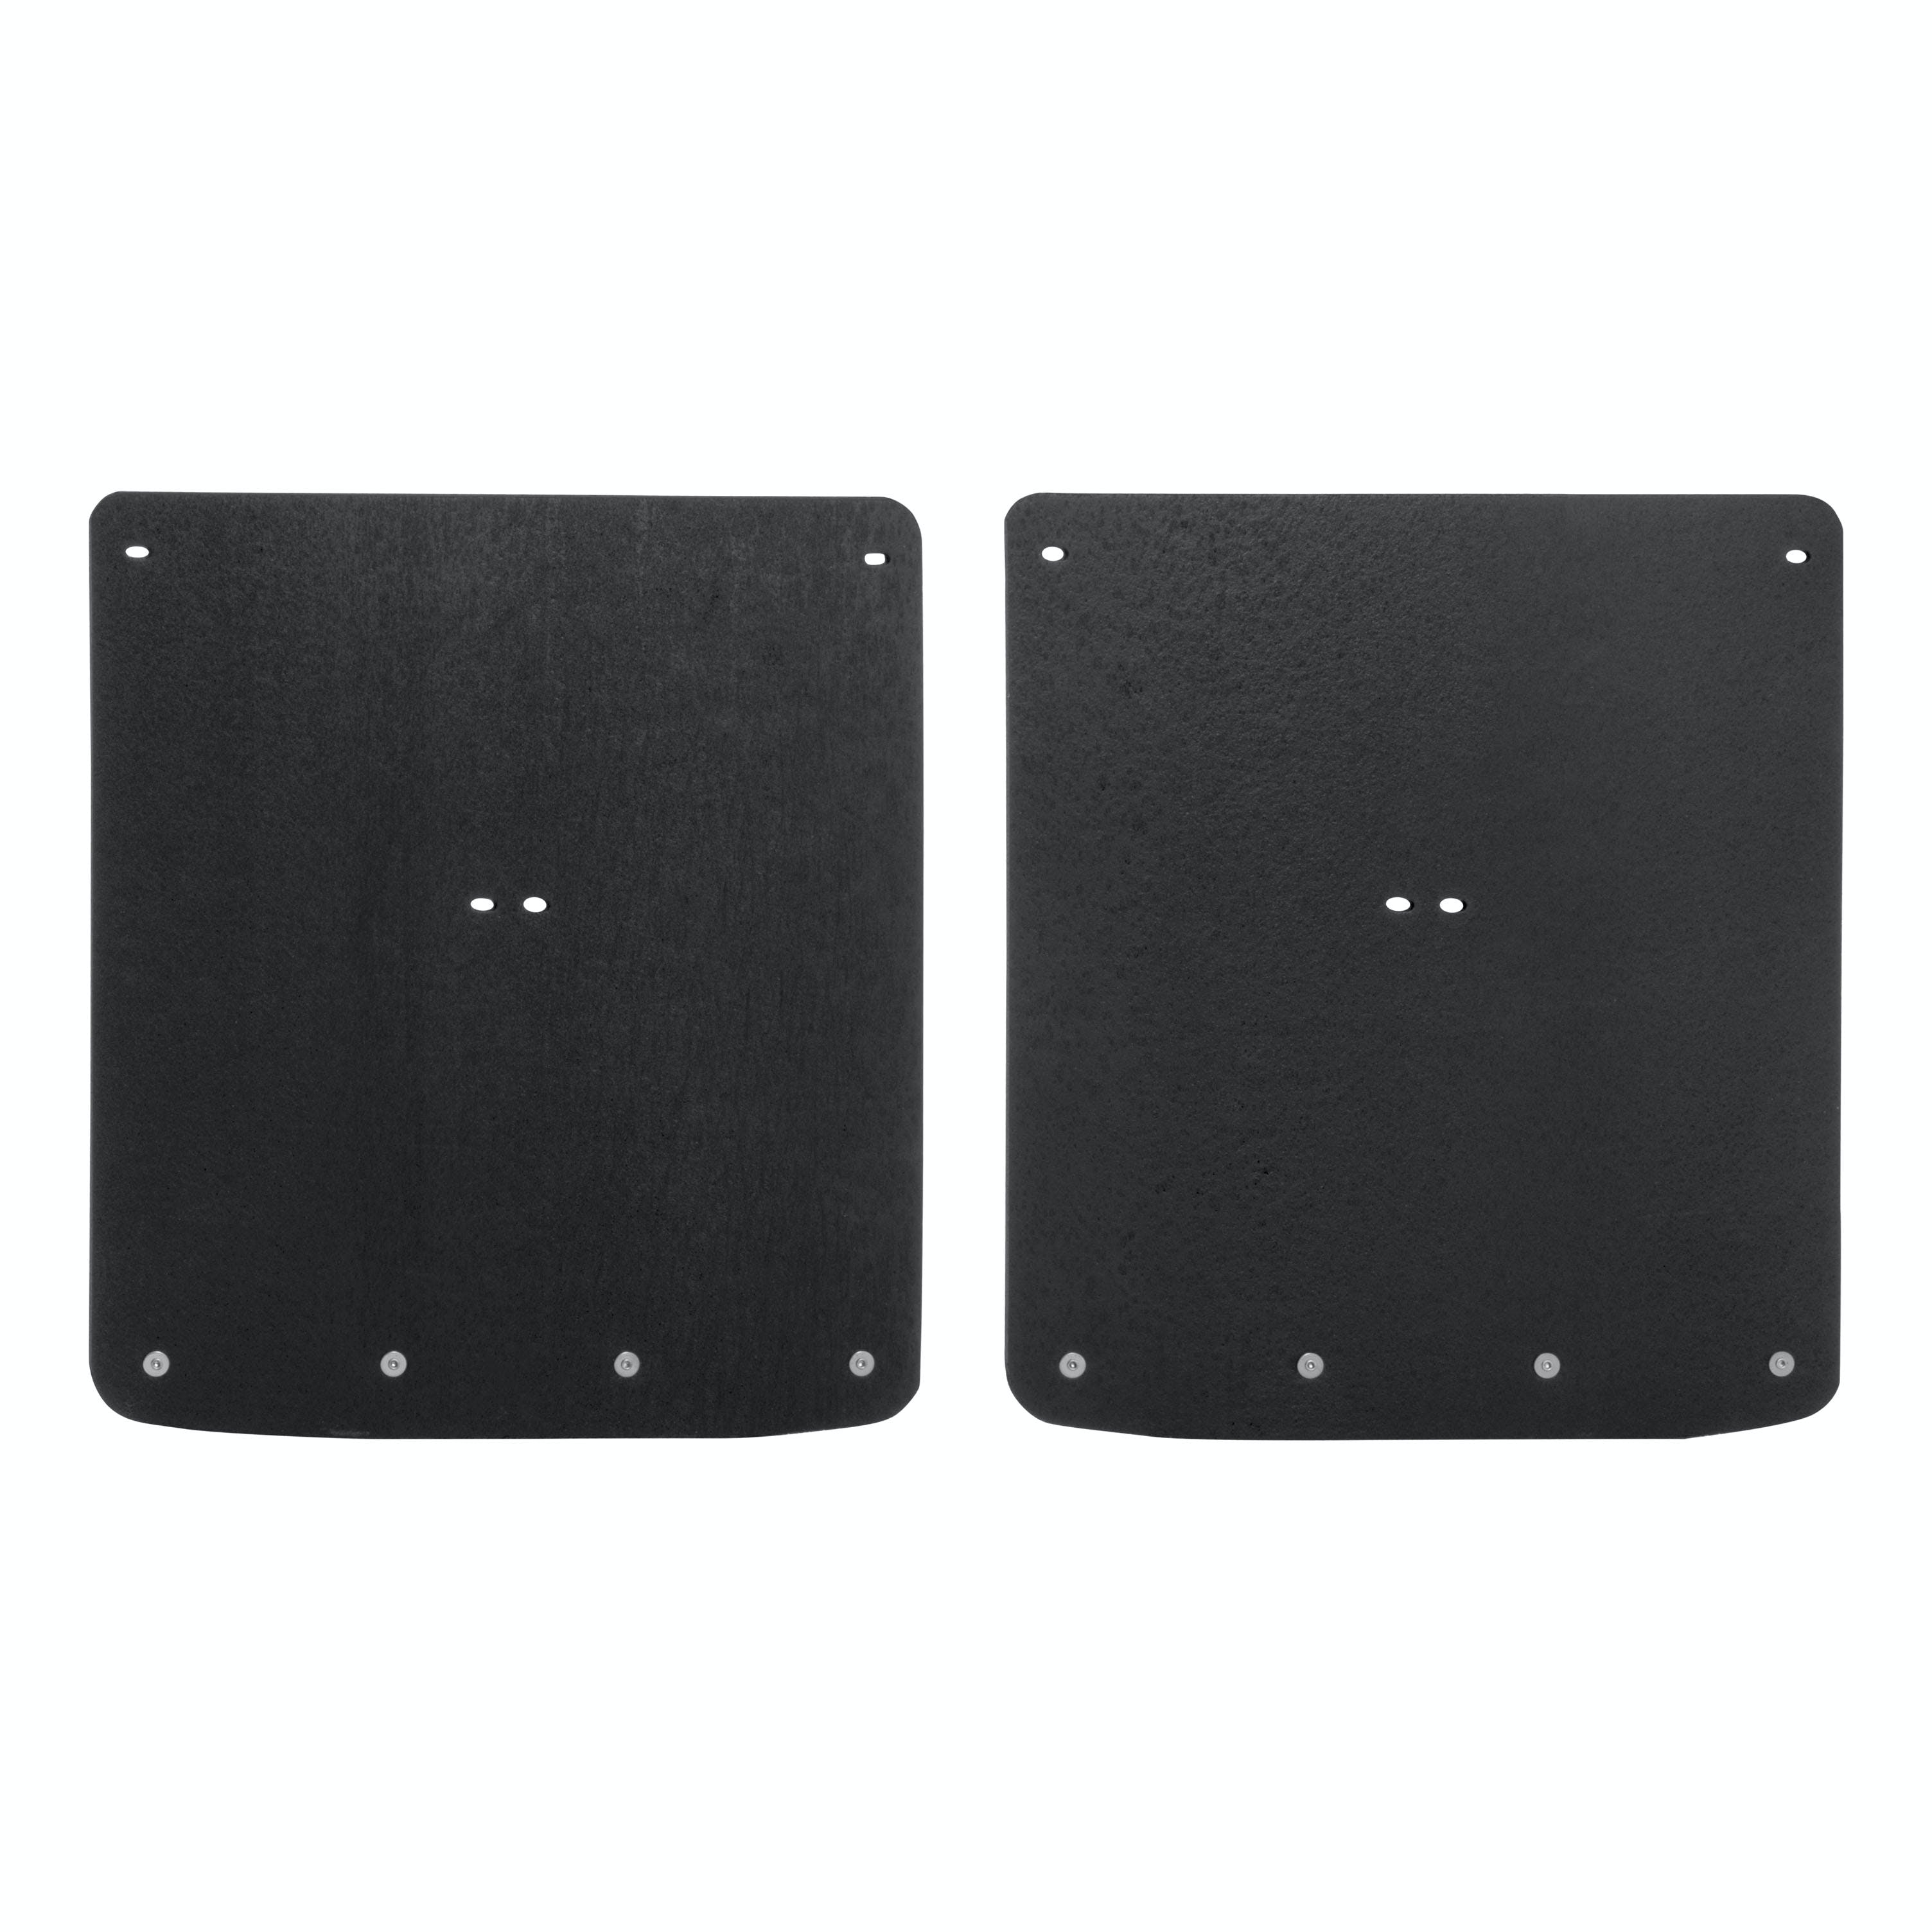 LUVERNE 250744 Textured Rubber Mud Guards